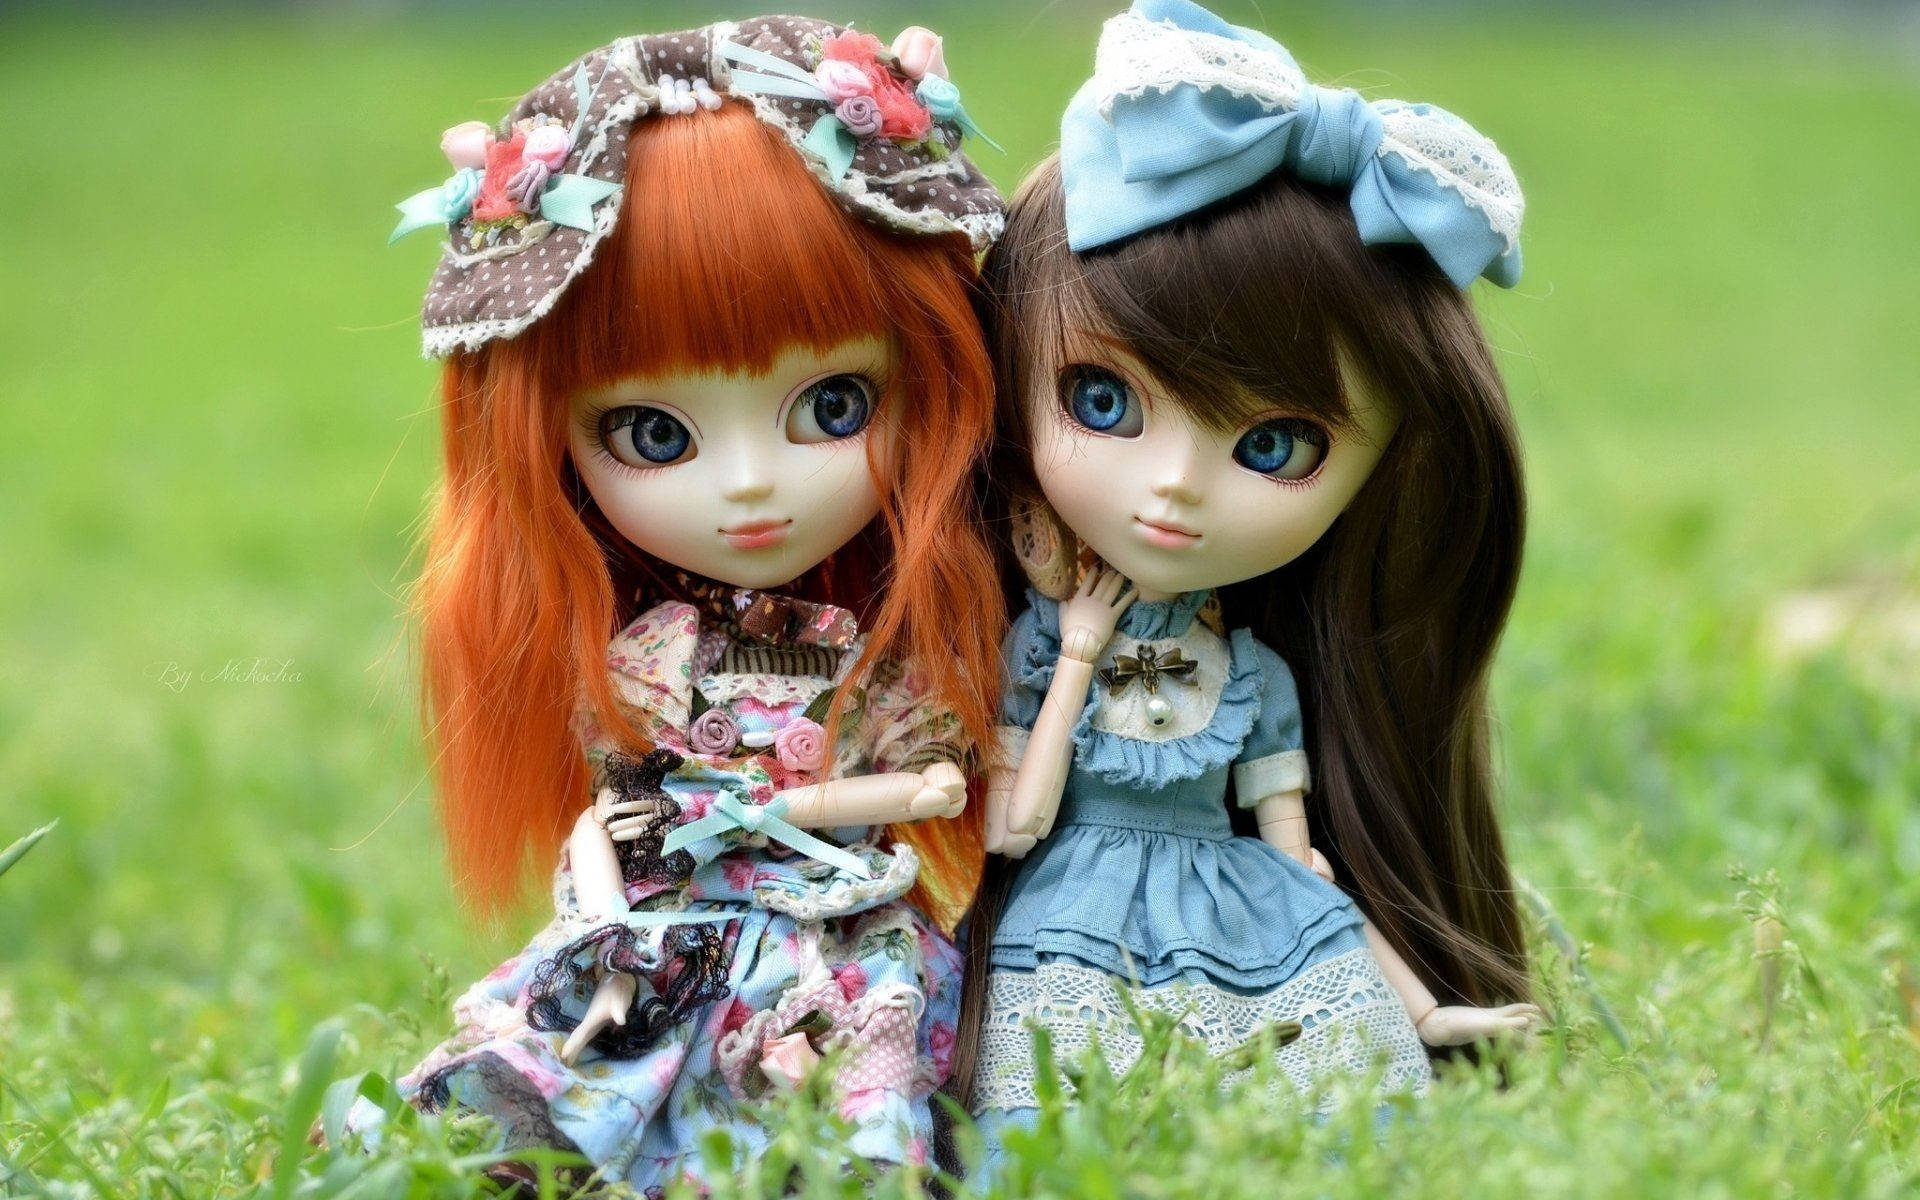 Cute Doll wallpapers | Facebook